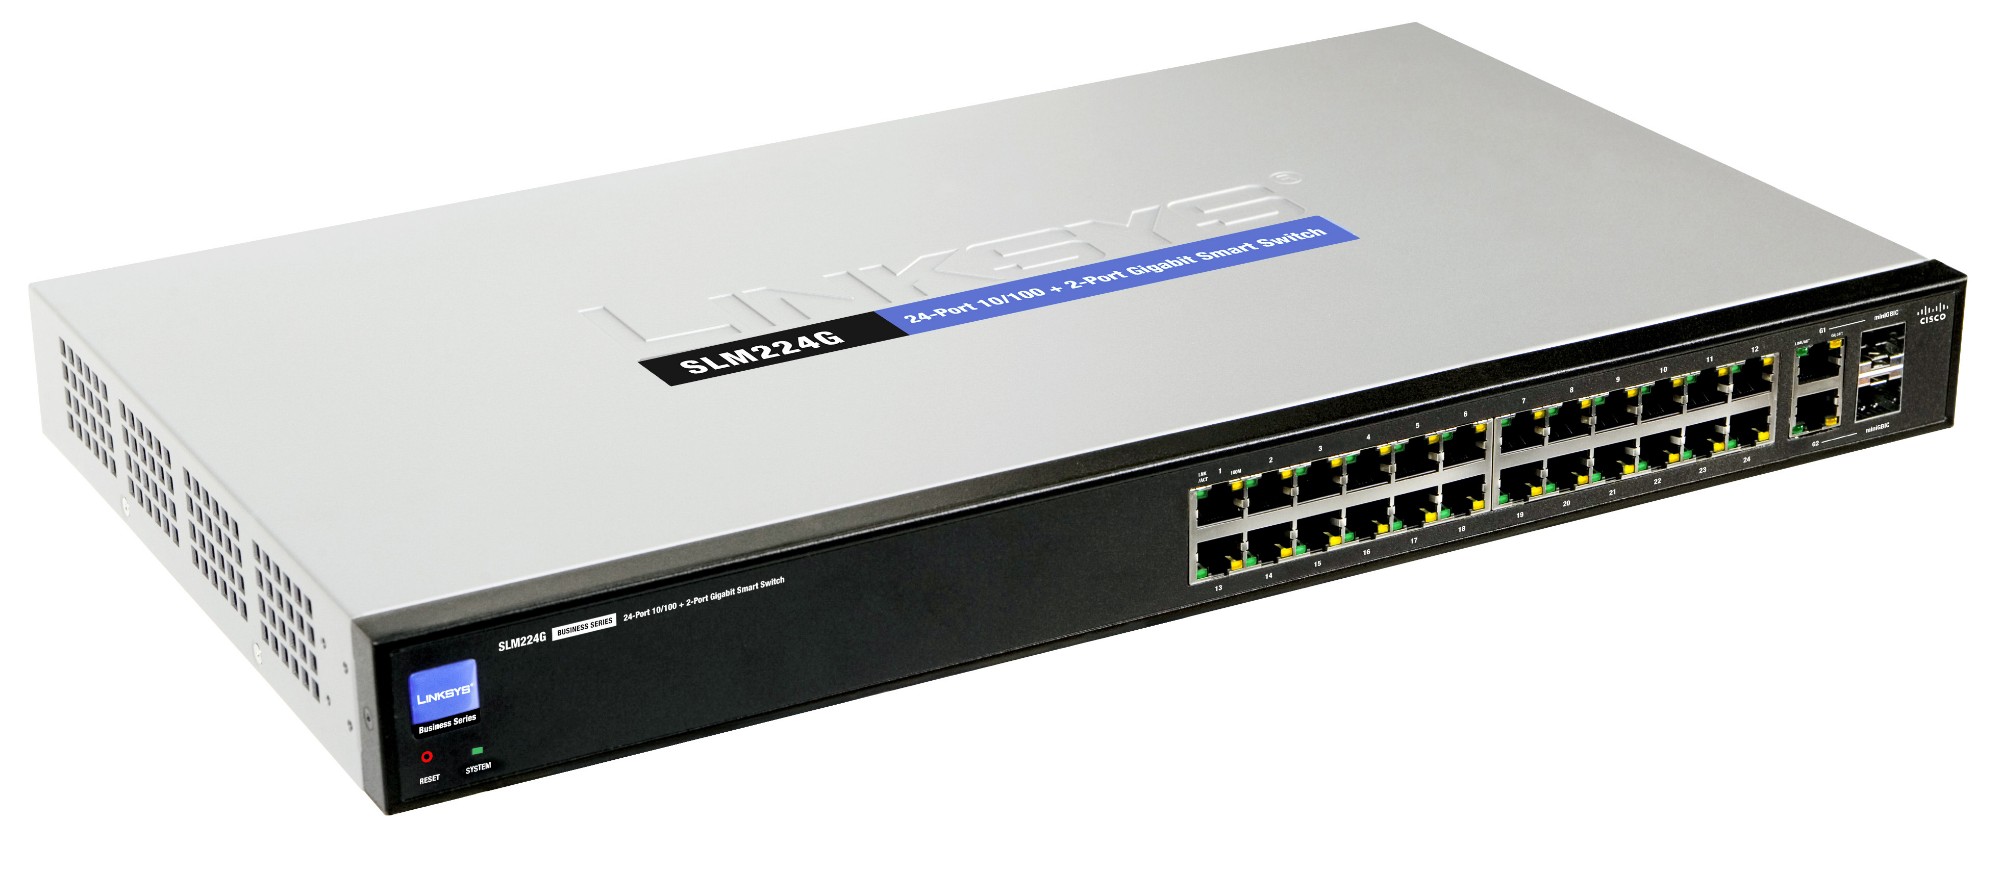 Cisco 24-port 10/100 + 2-port 10/100/1000 Gigabit Smart Switch with 2 combo SFPs Managed